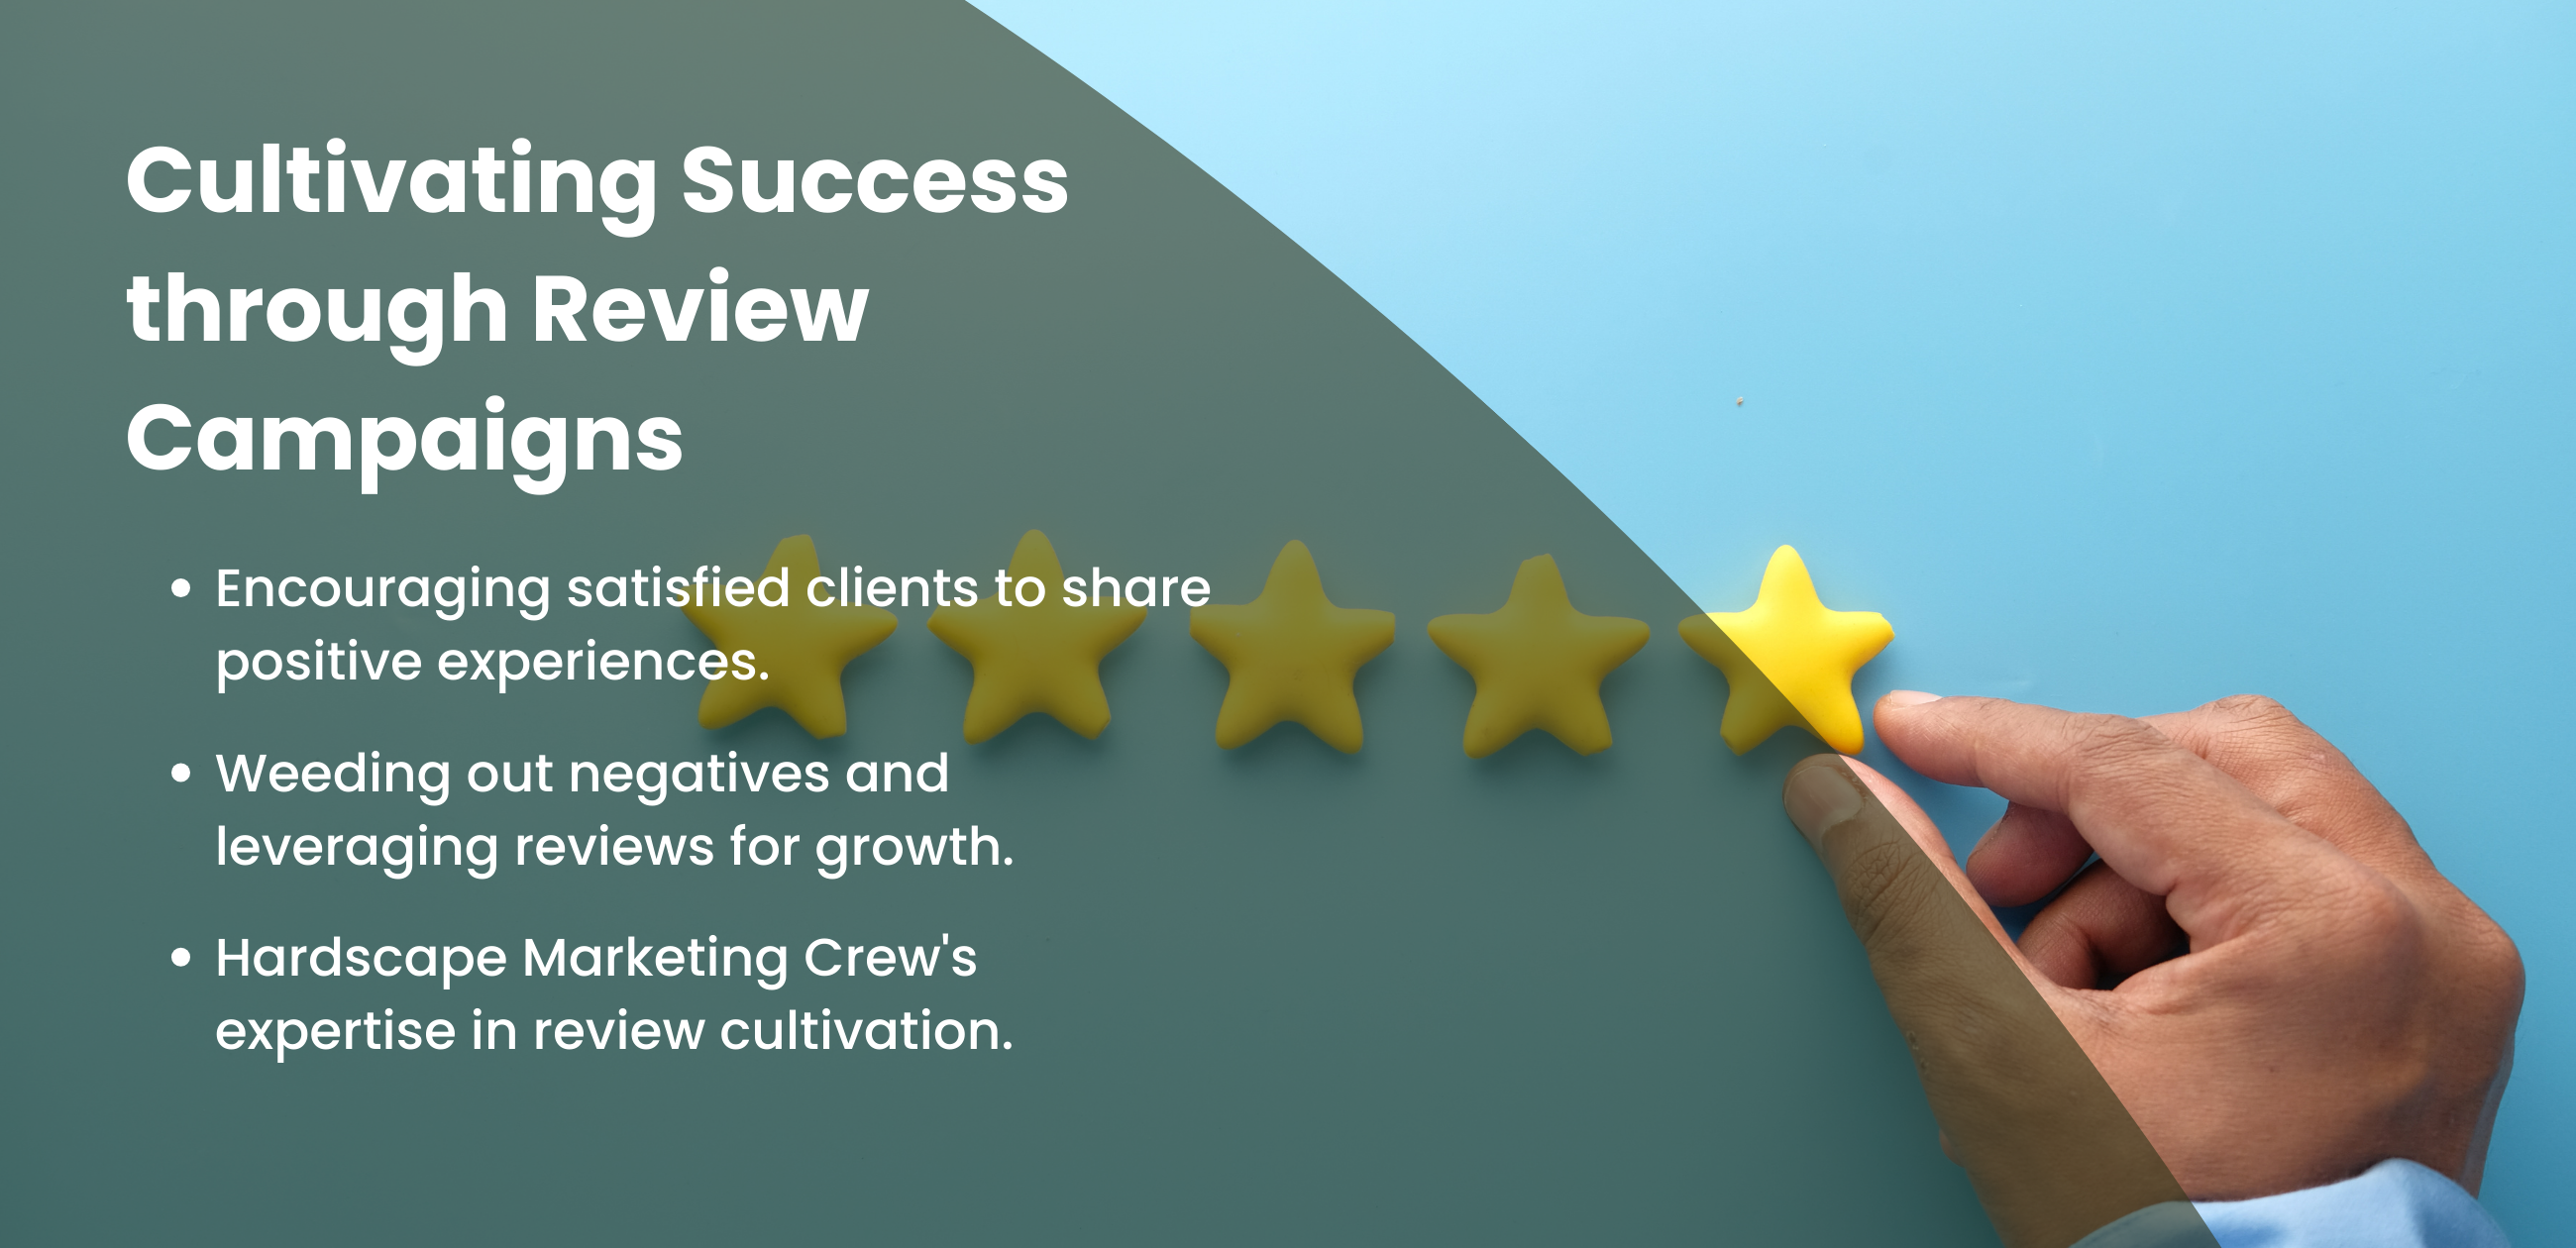 Cultivating Success through Review Campaigns